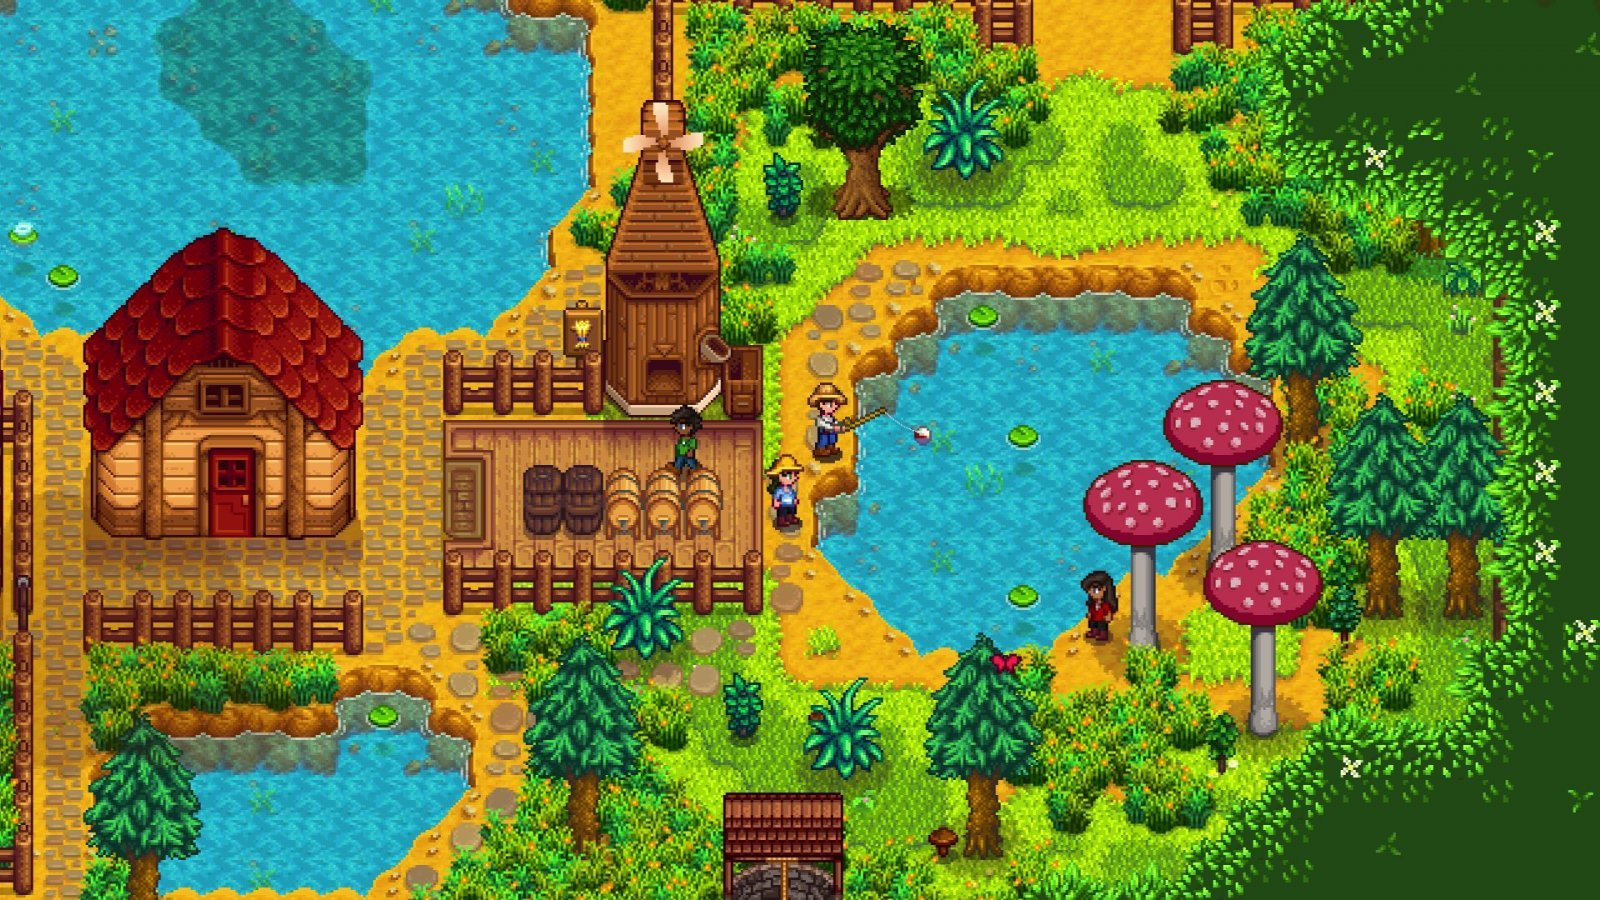 Stardew Valley's 1.3 update is now live on Switch, includes multiplayer and more events - GAMING TREND